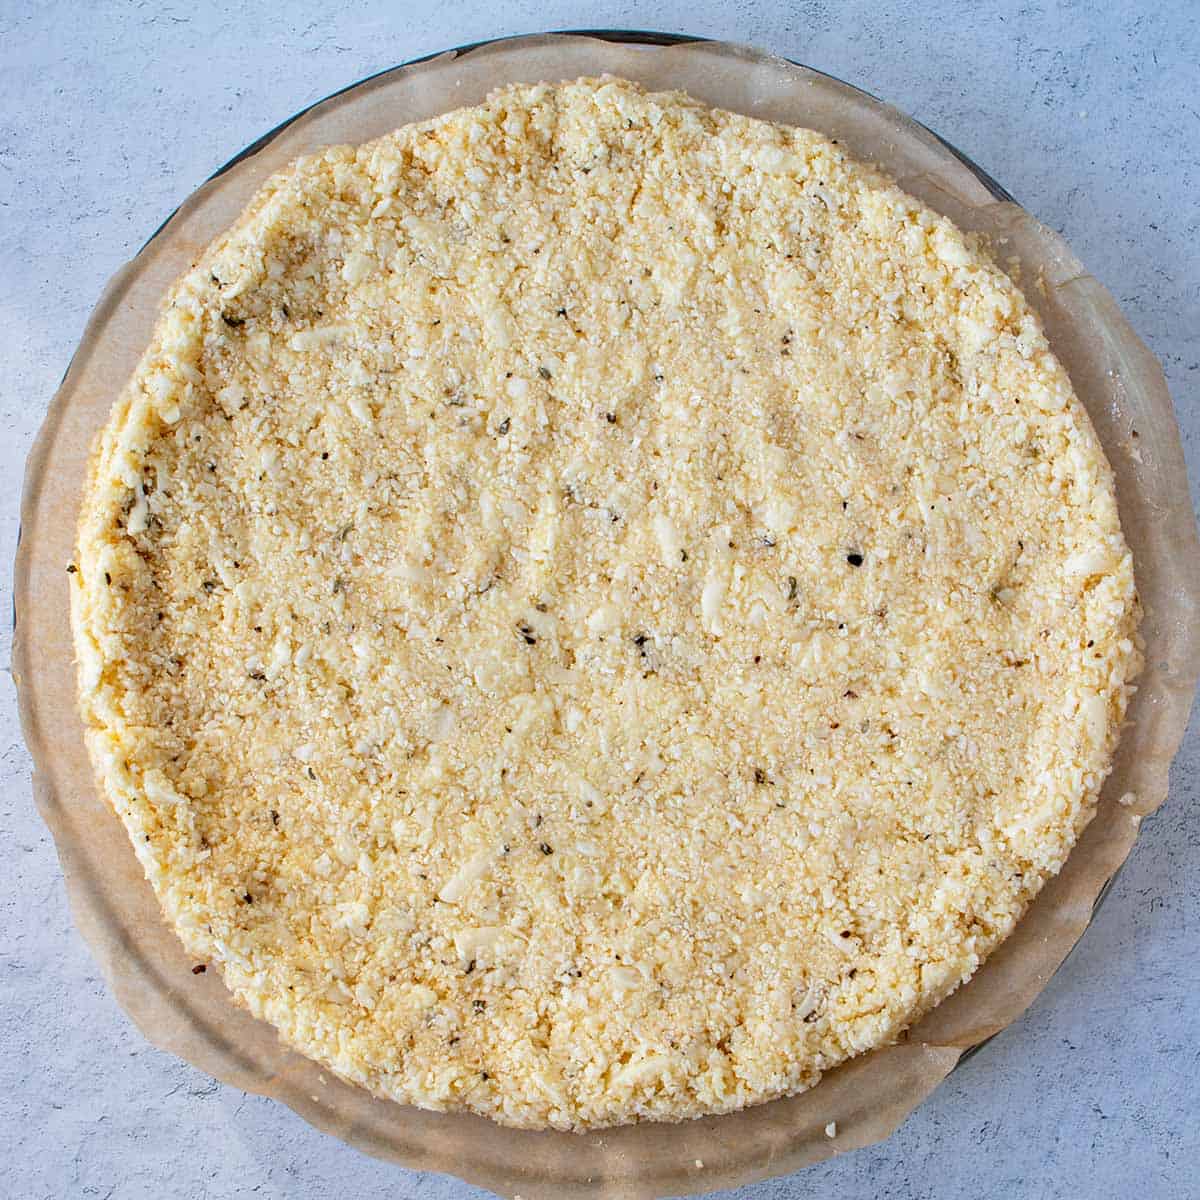 cauliflower pizza crust spread out on parchment paper prior to baking.